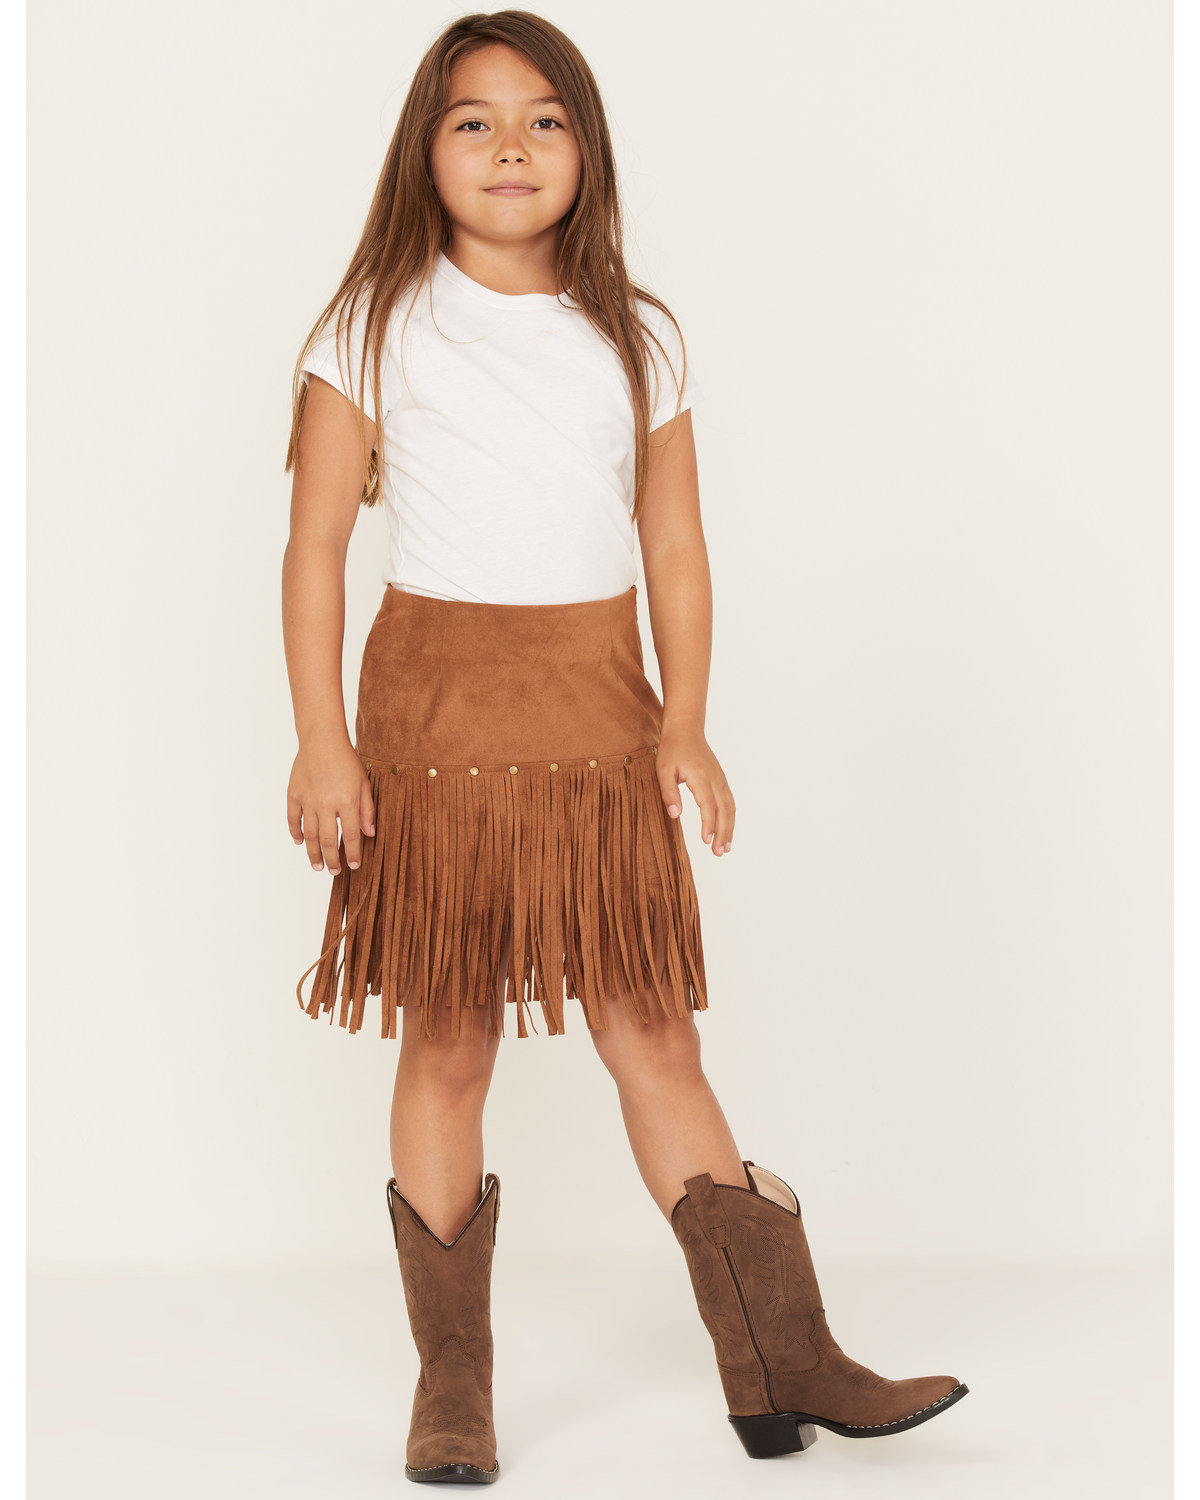 Fornia Girls' Fringe Faux Suede Studded Skirt